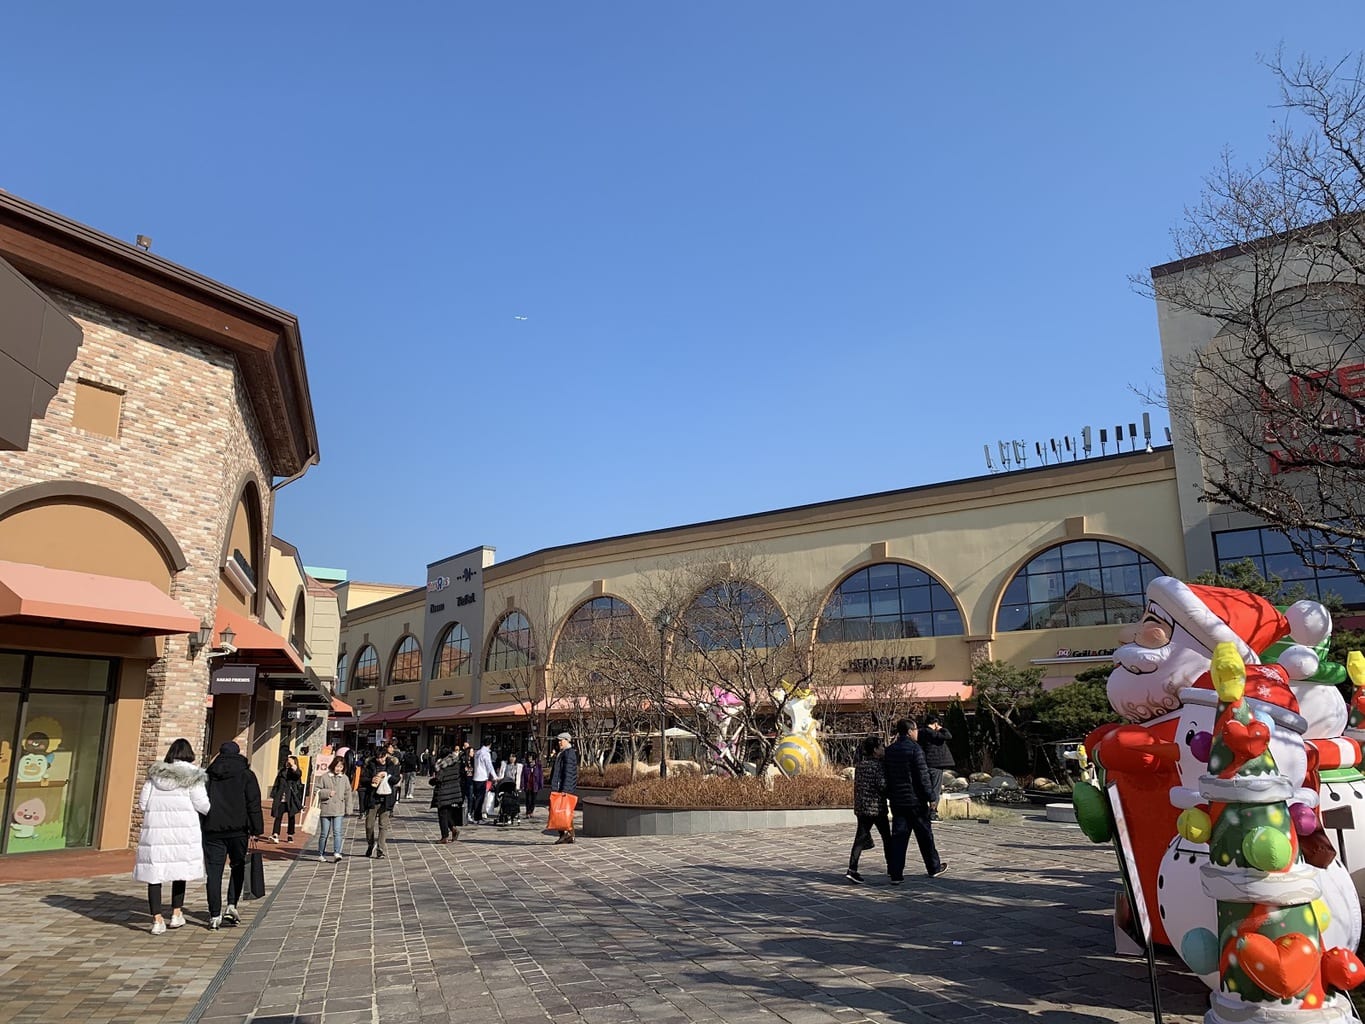 Lotte Premium Outlet in Giheung, Gyeonggi Province